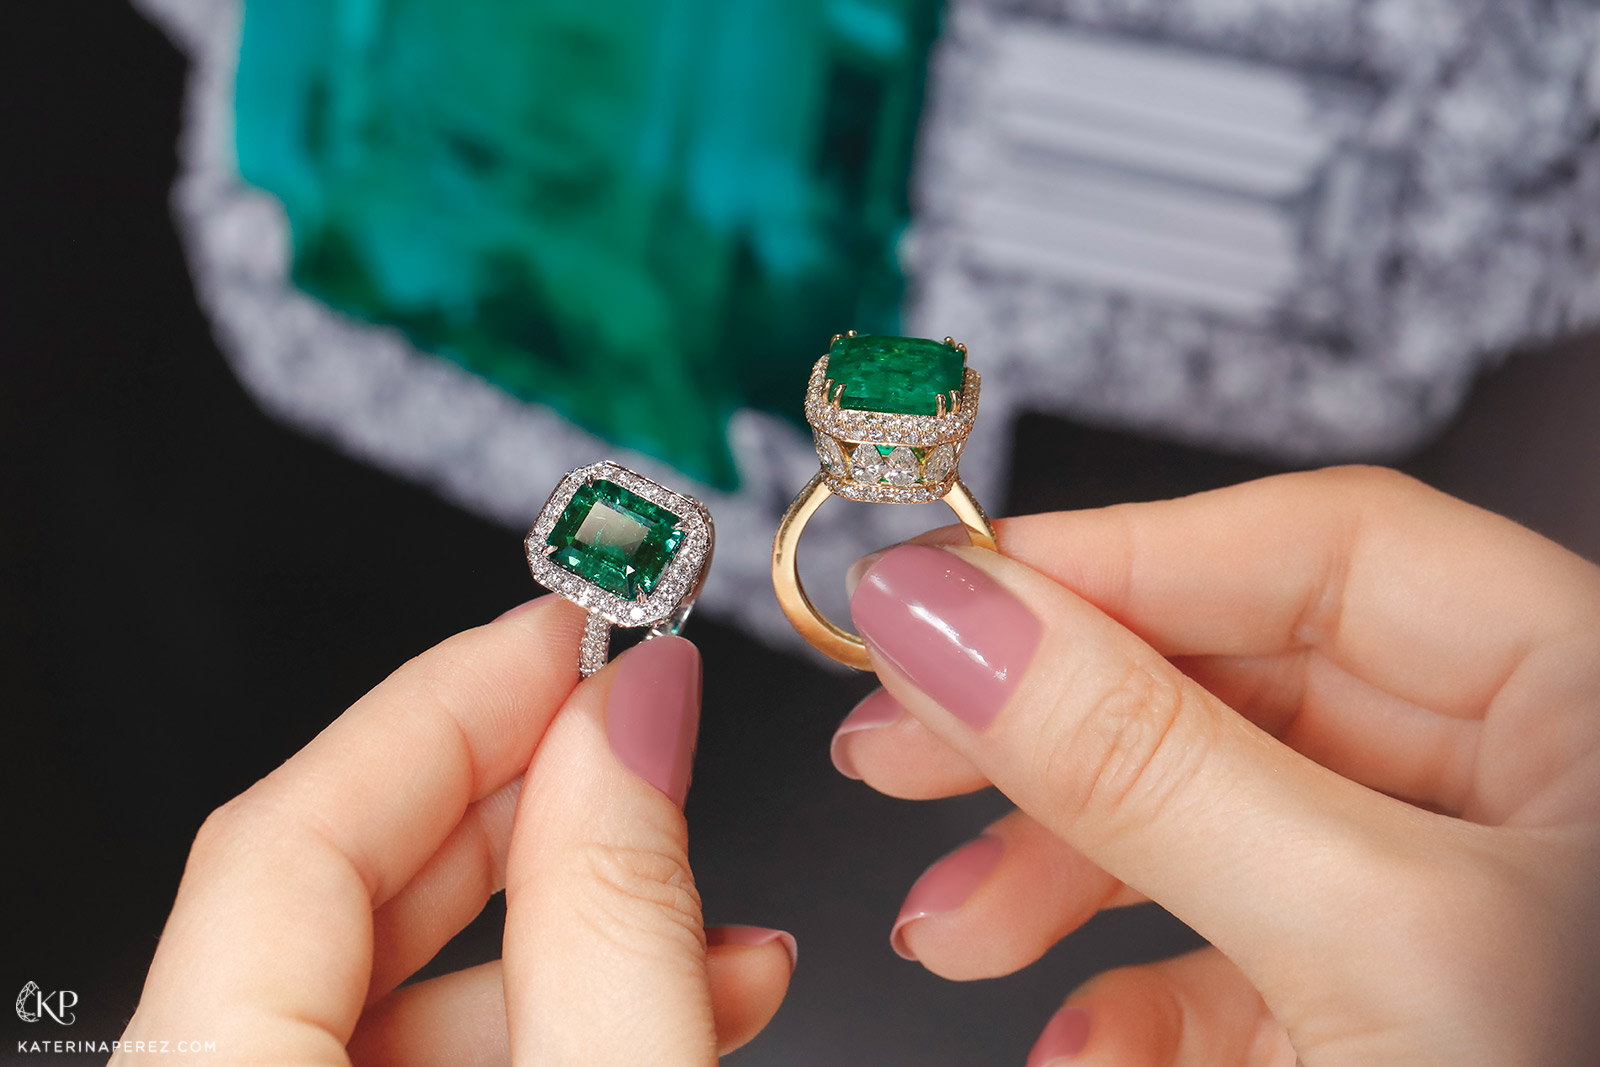 Inbar rings, left to right: 4.04 ct Afghani emerald in white gold and diamonds, and 12.5 ct Afghani emerald in yellow gold and diamonds 